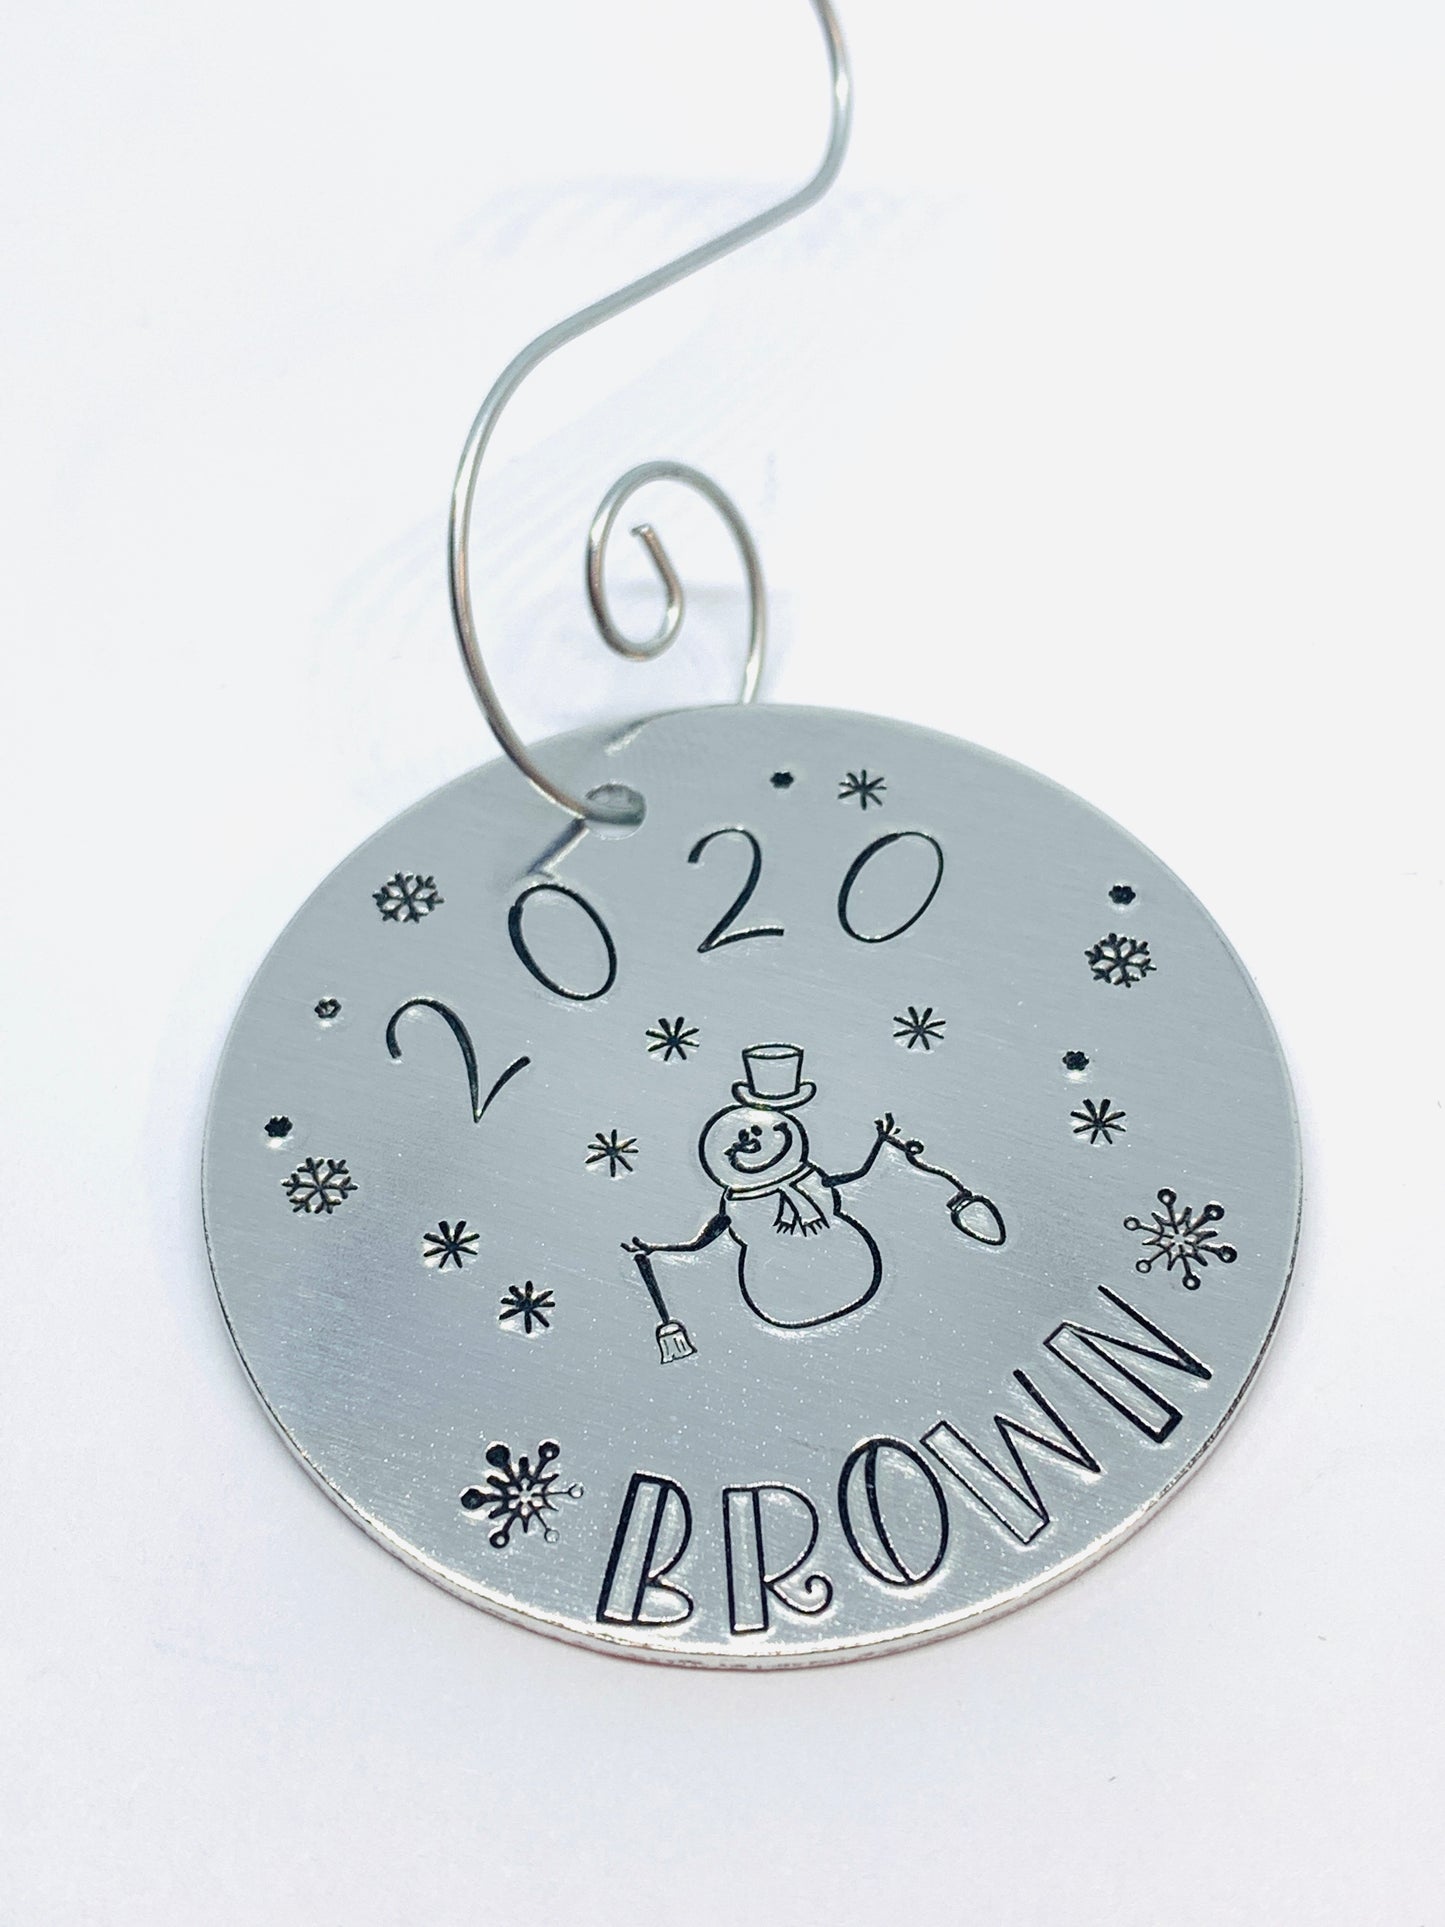 Snowman Annual Family - Hand Stamped Ornament - Personalized!